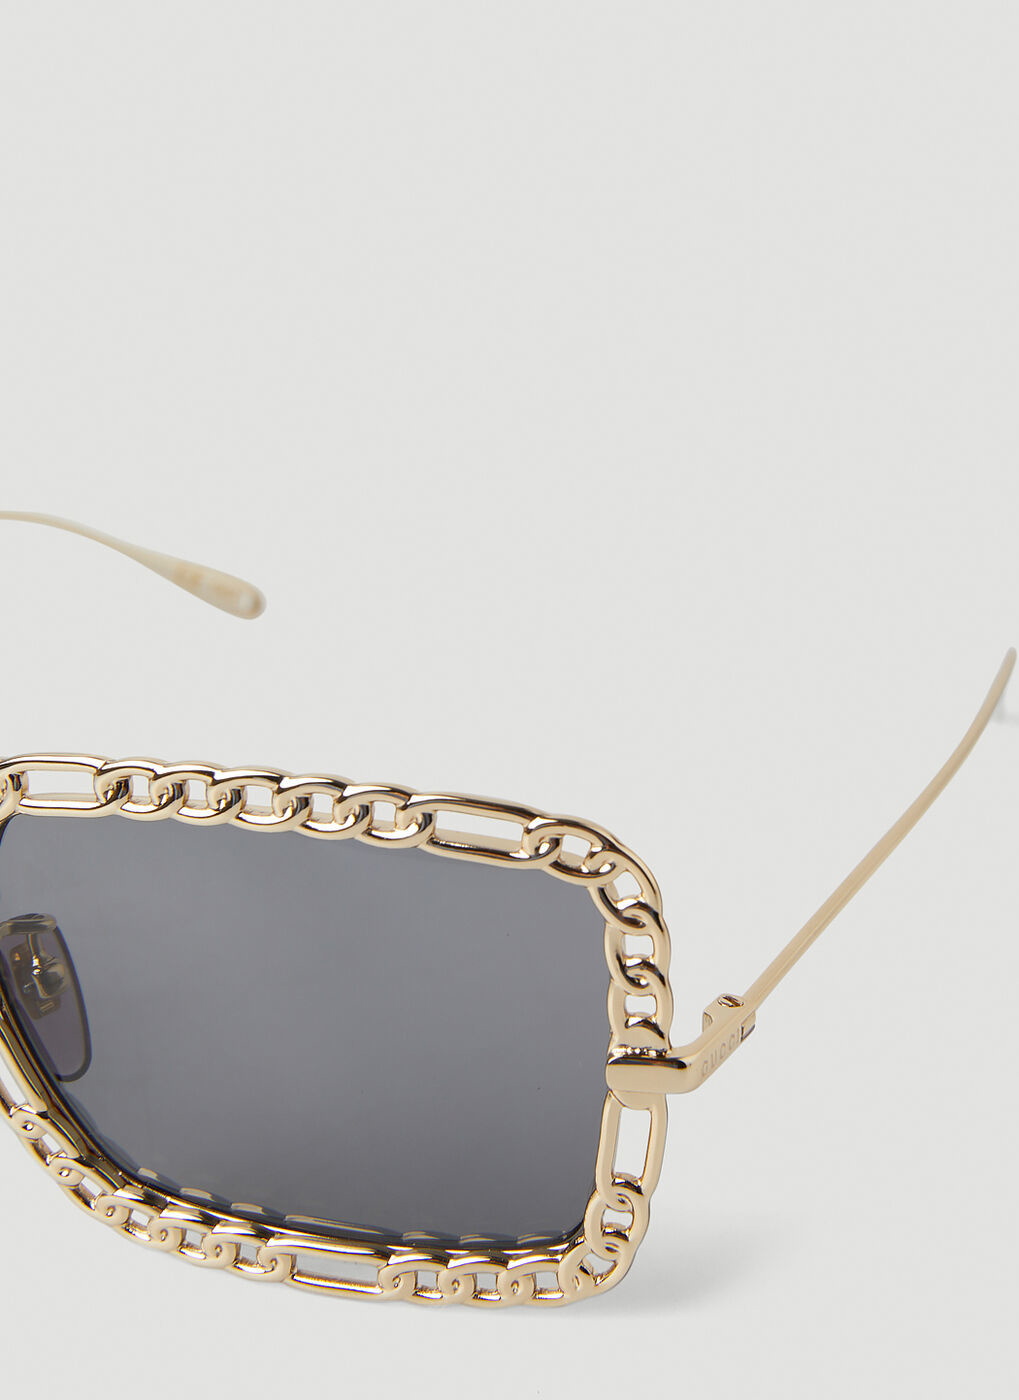 Sunglasses Modern Thick Gold Frames Chain Detail On Side New